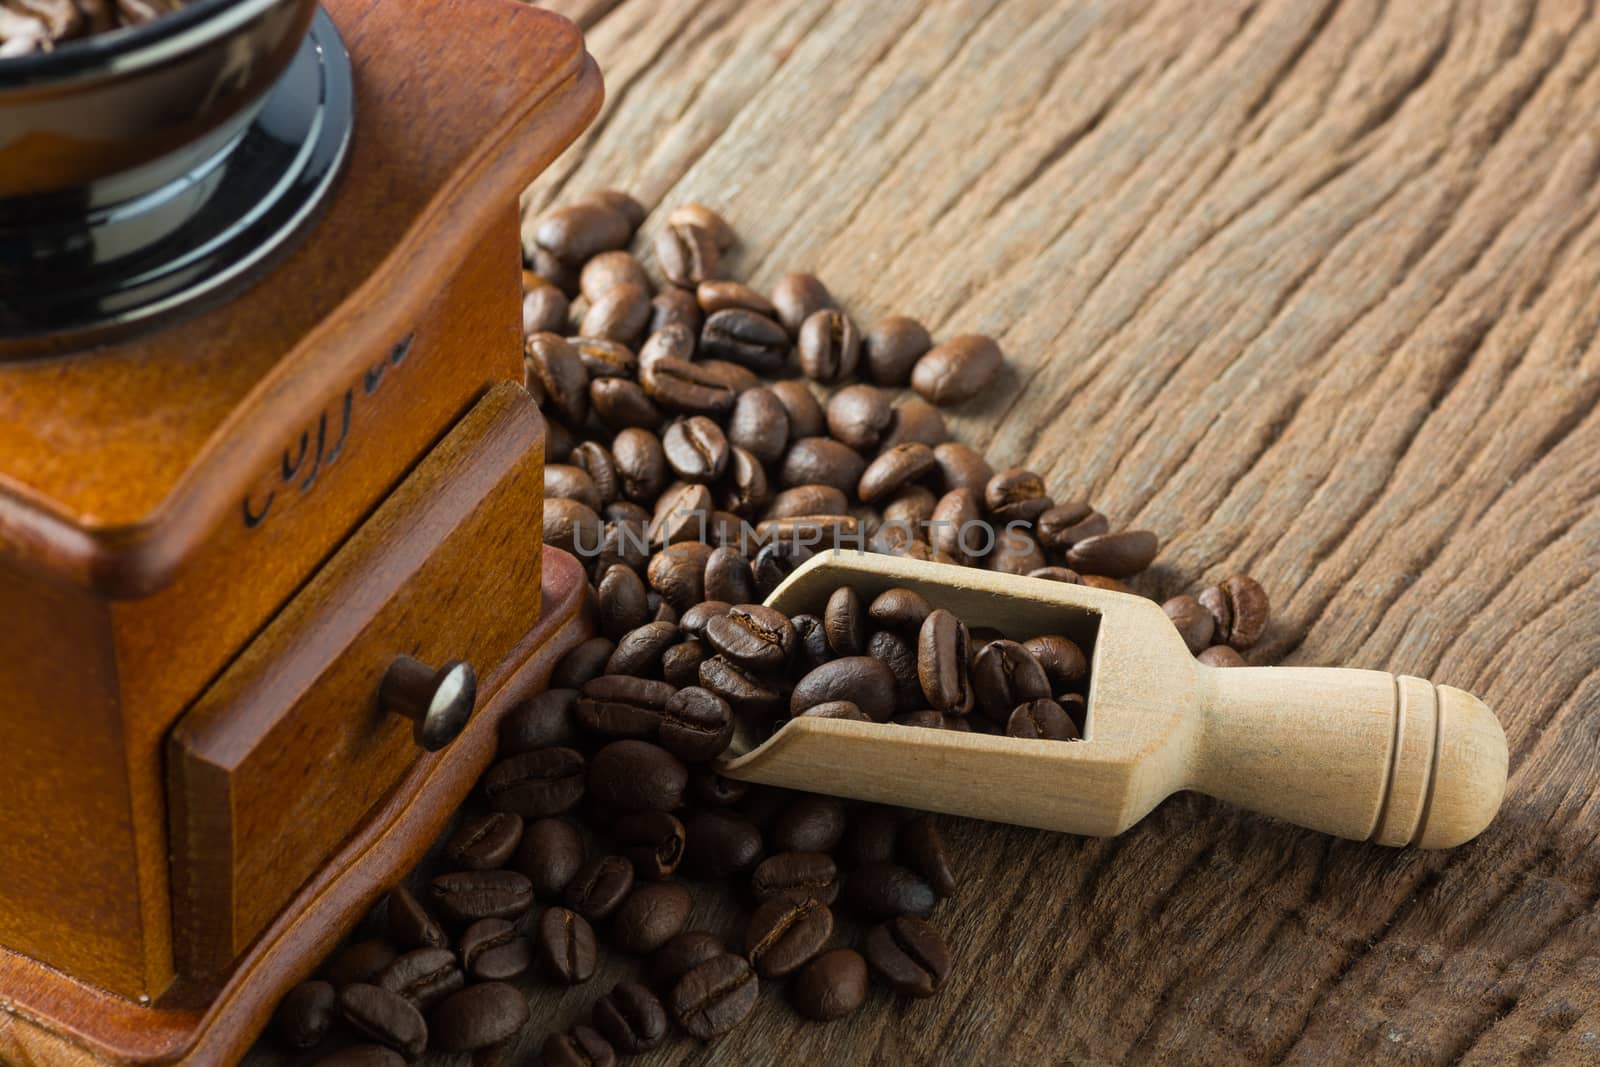 Stack of Fresh Raw Coffee Beans on Wooden Desk Table with Wooden Spoon and Coffee Grinder as Refresh Beverages Concept